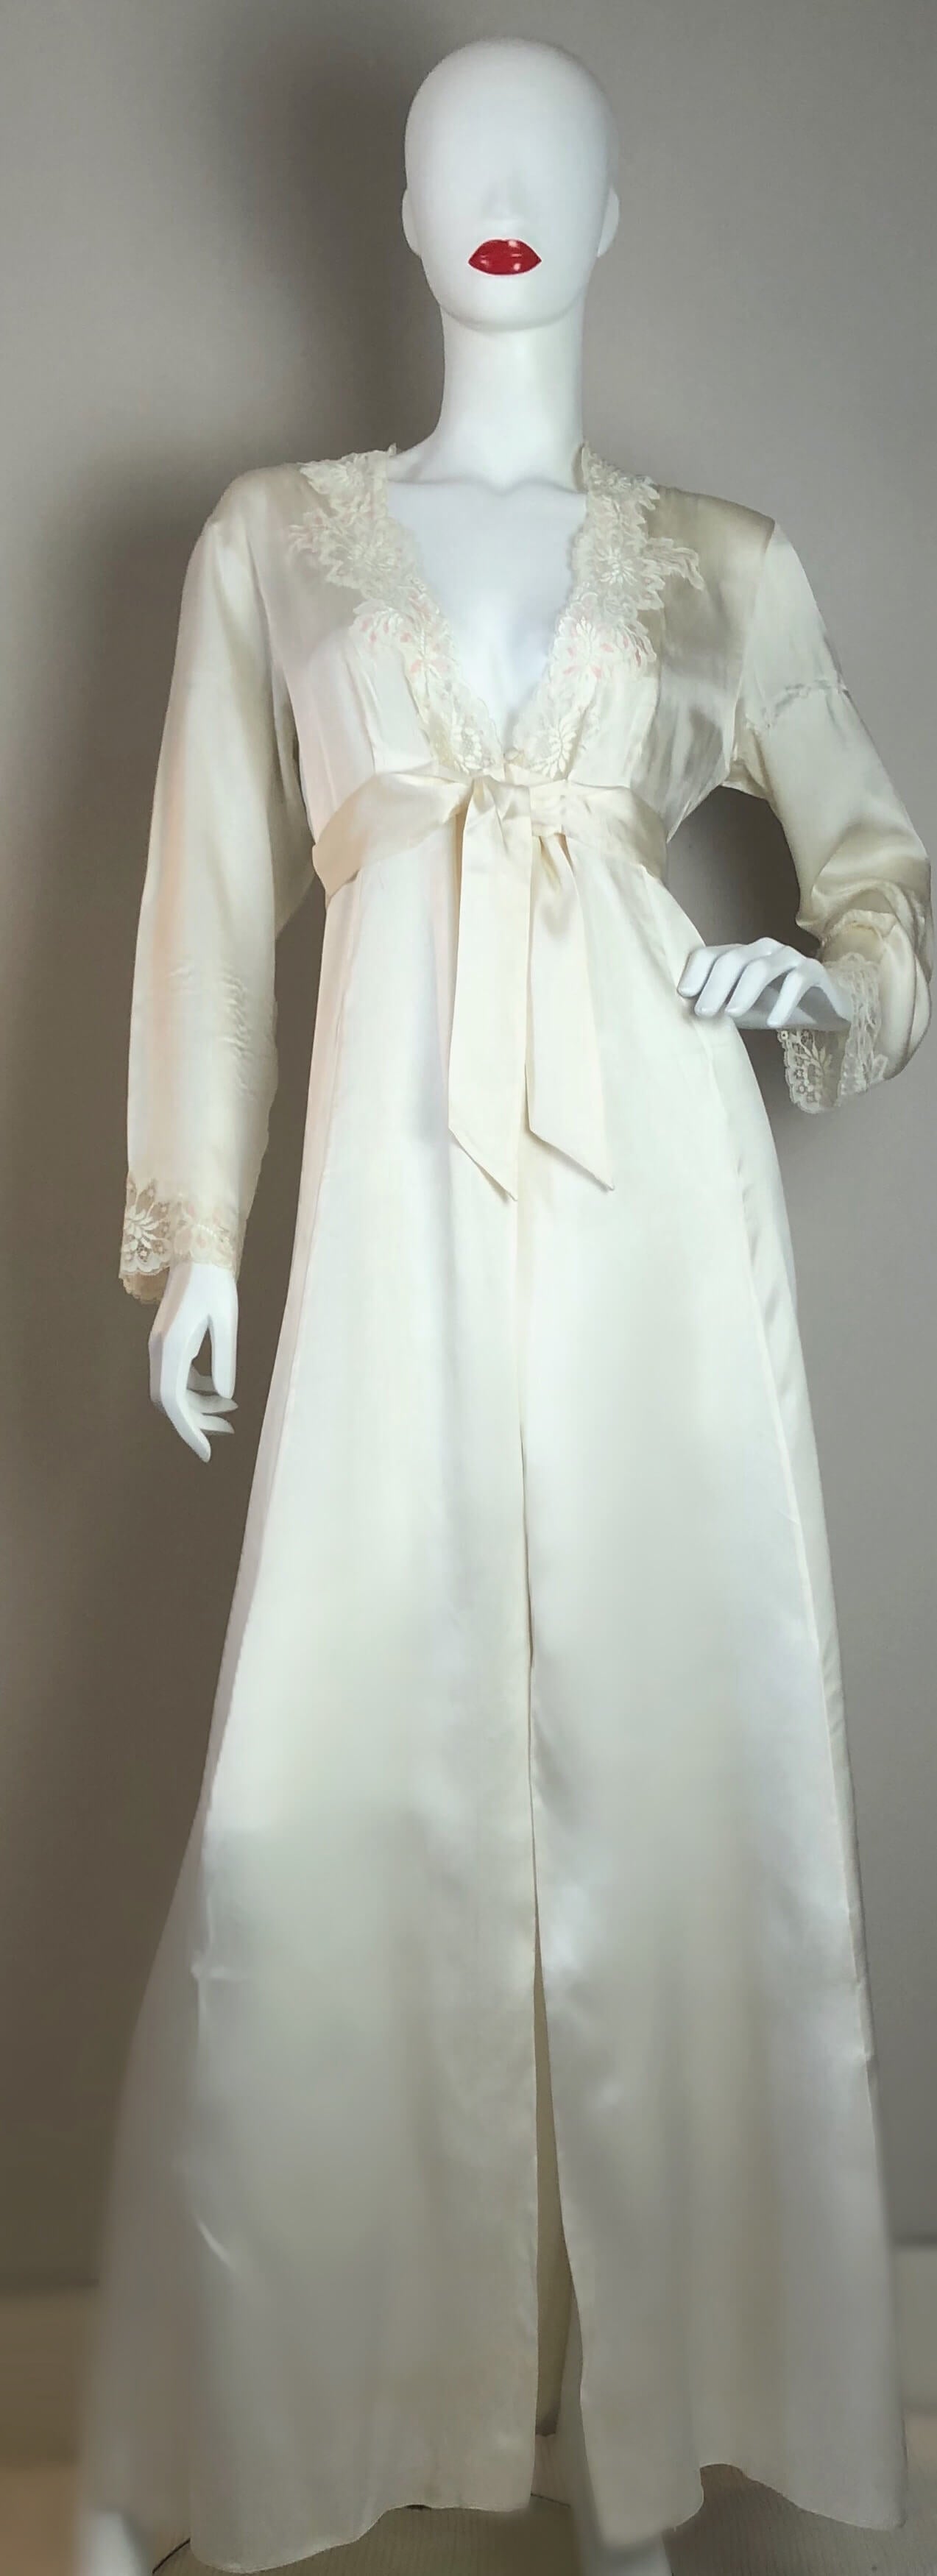 Ivory silk dressing gown